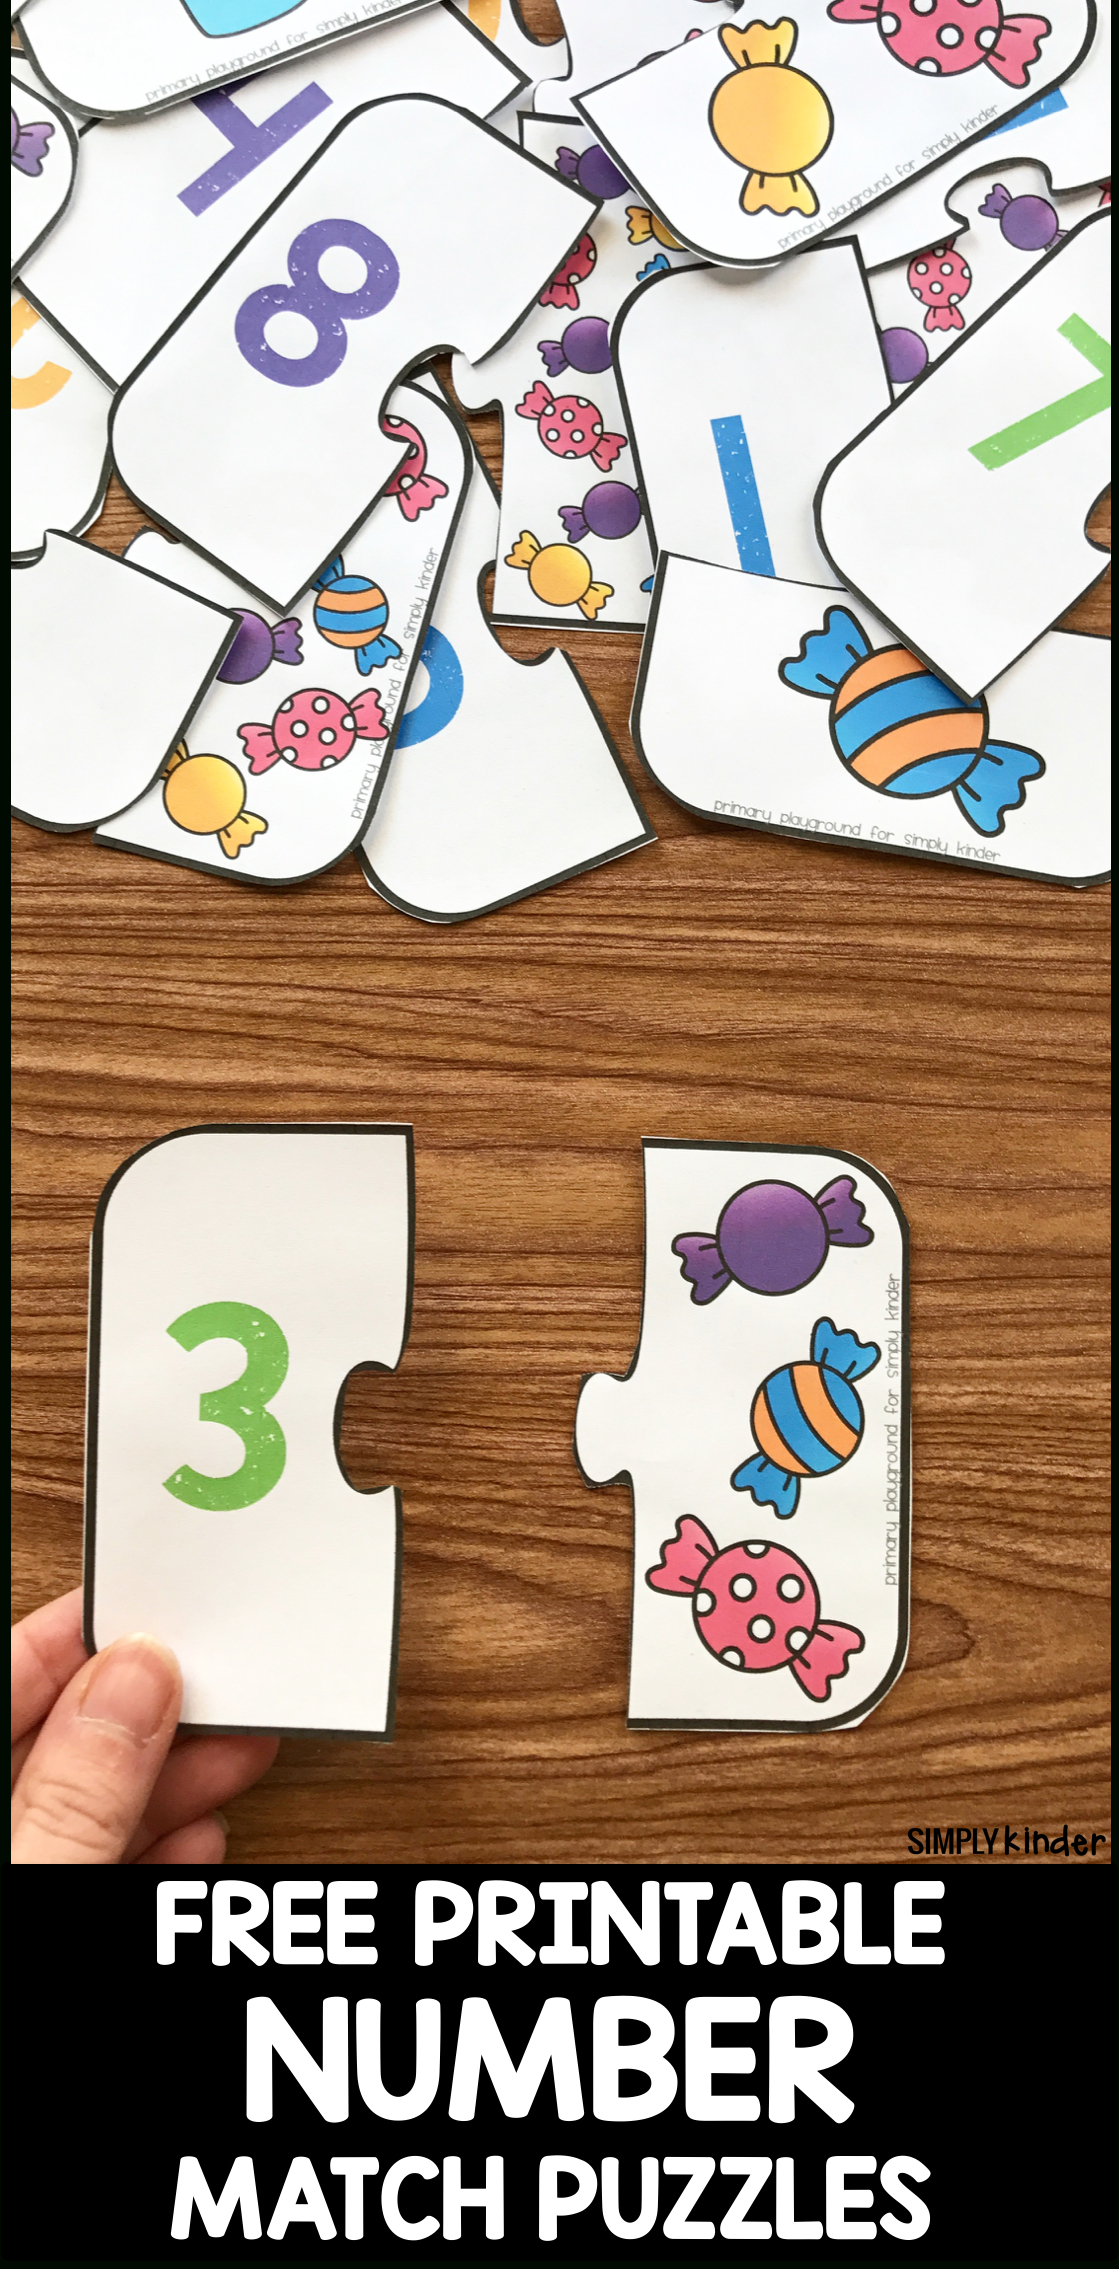 Free Printable Number Match Puzzles - Simply Kinder - Printable Puzzles Kindergarten